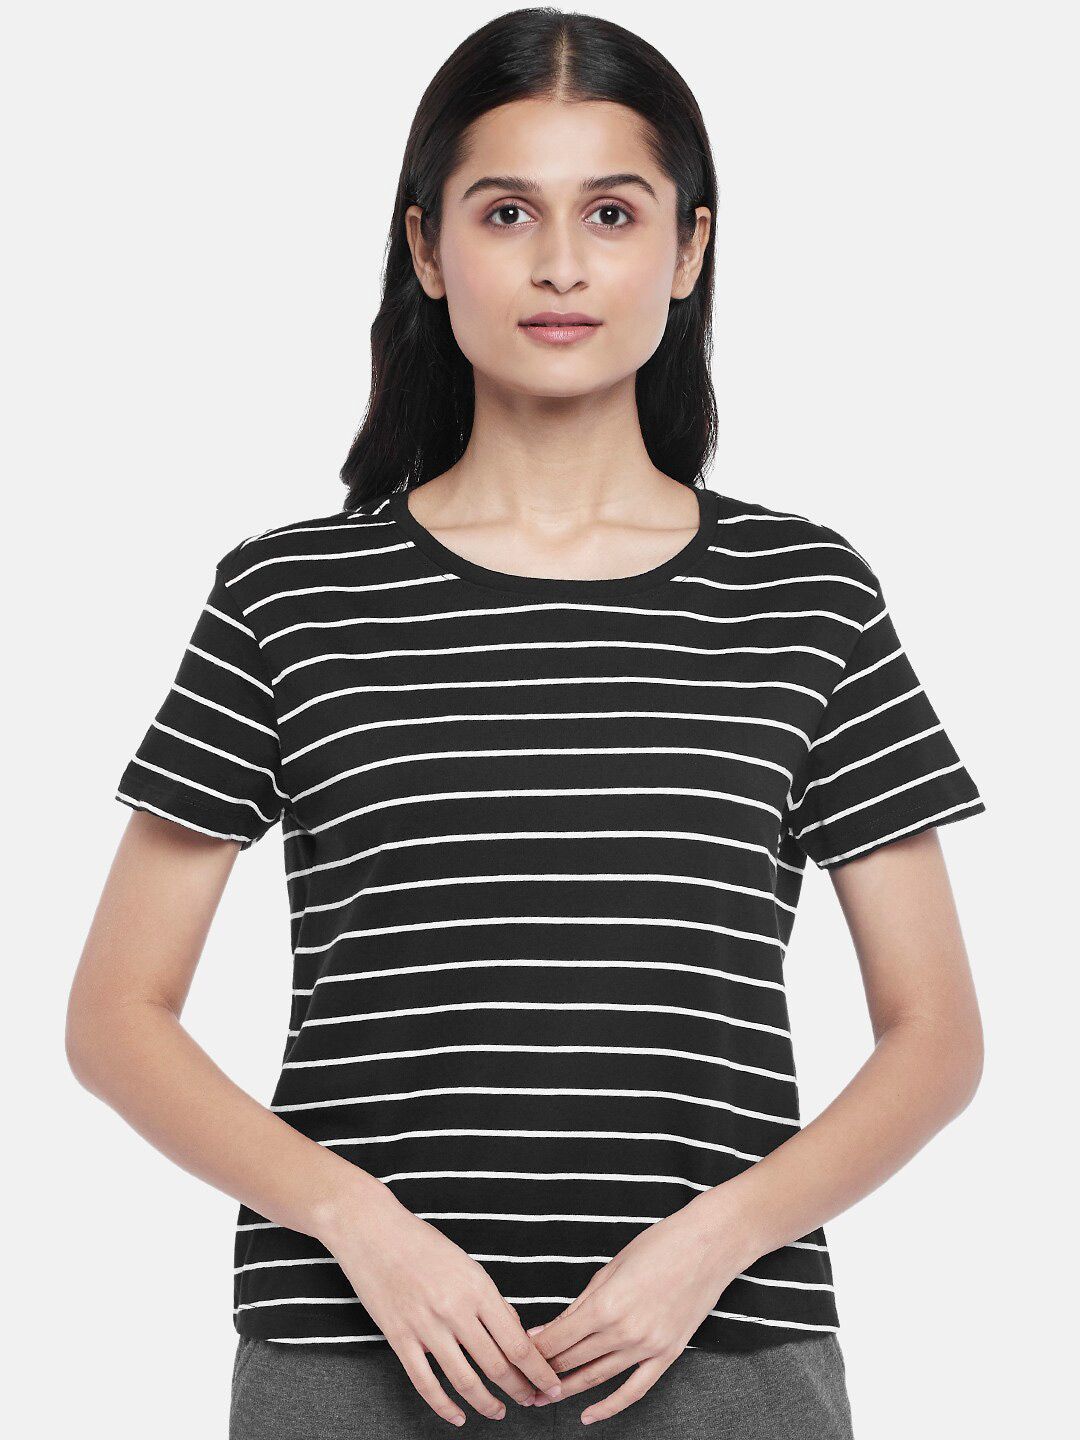 Dreamz by Pantaloons Black Striped Lounge tshirt Price in India